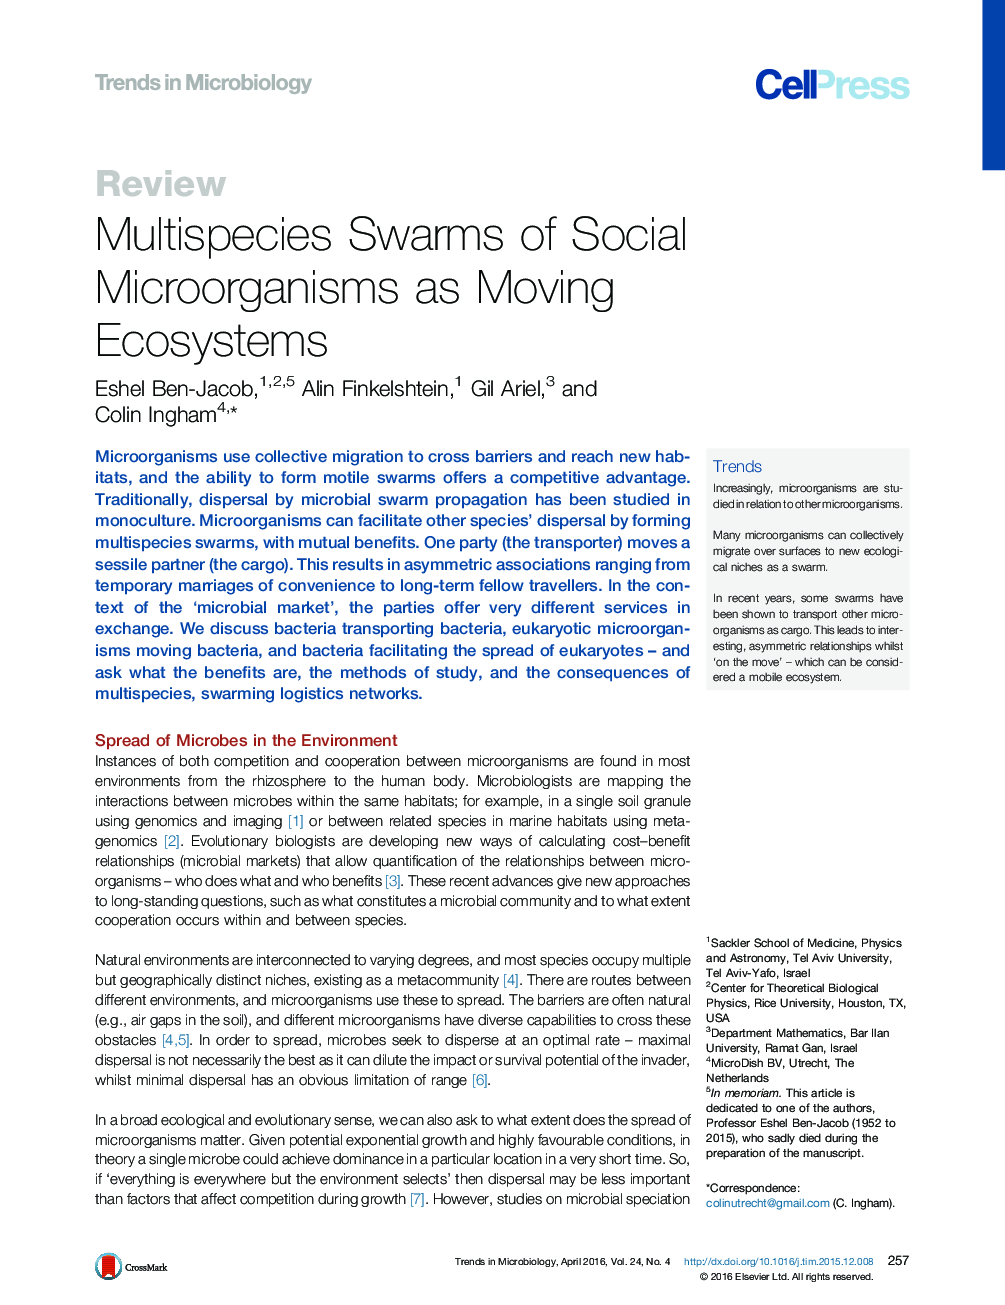 Multispecies Swarms of Social Microorganisms as Moving Ecosystems